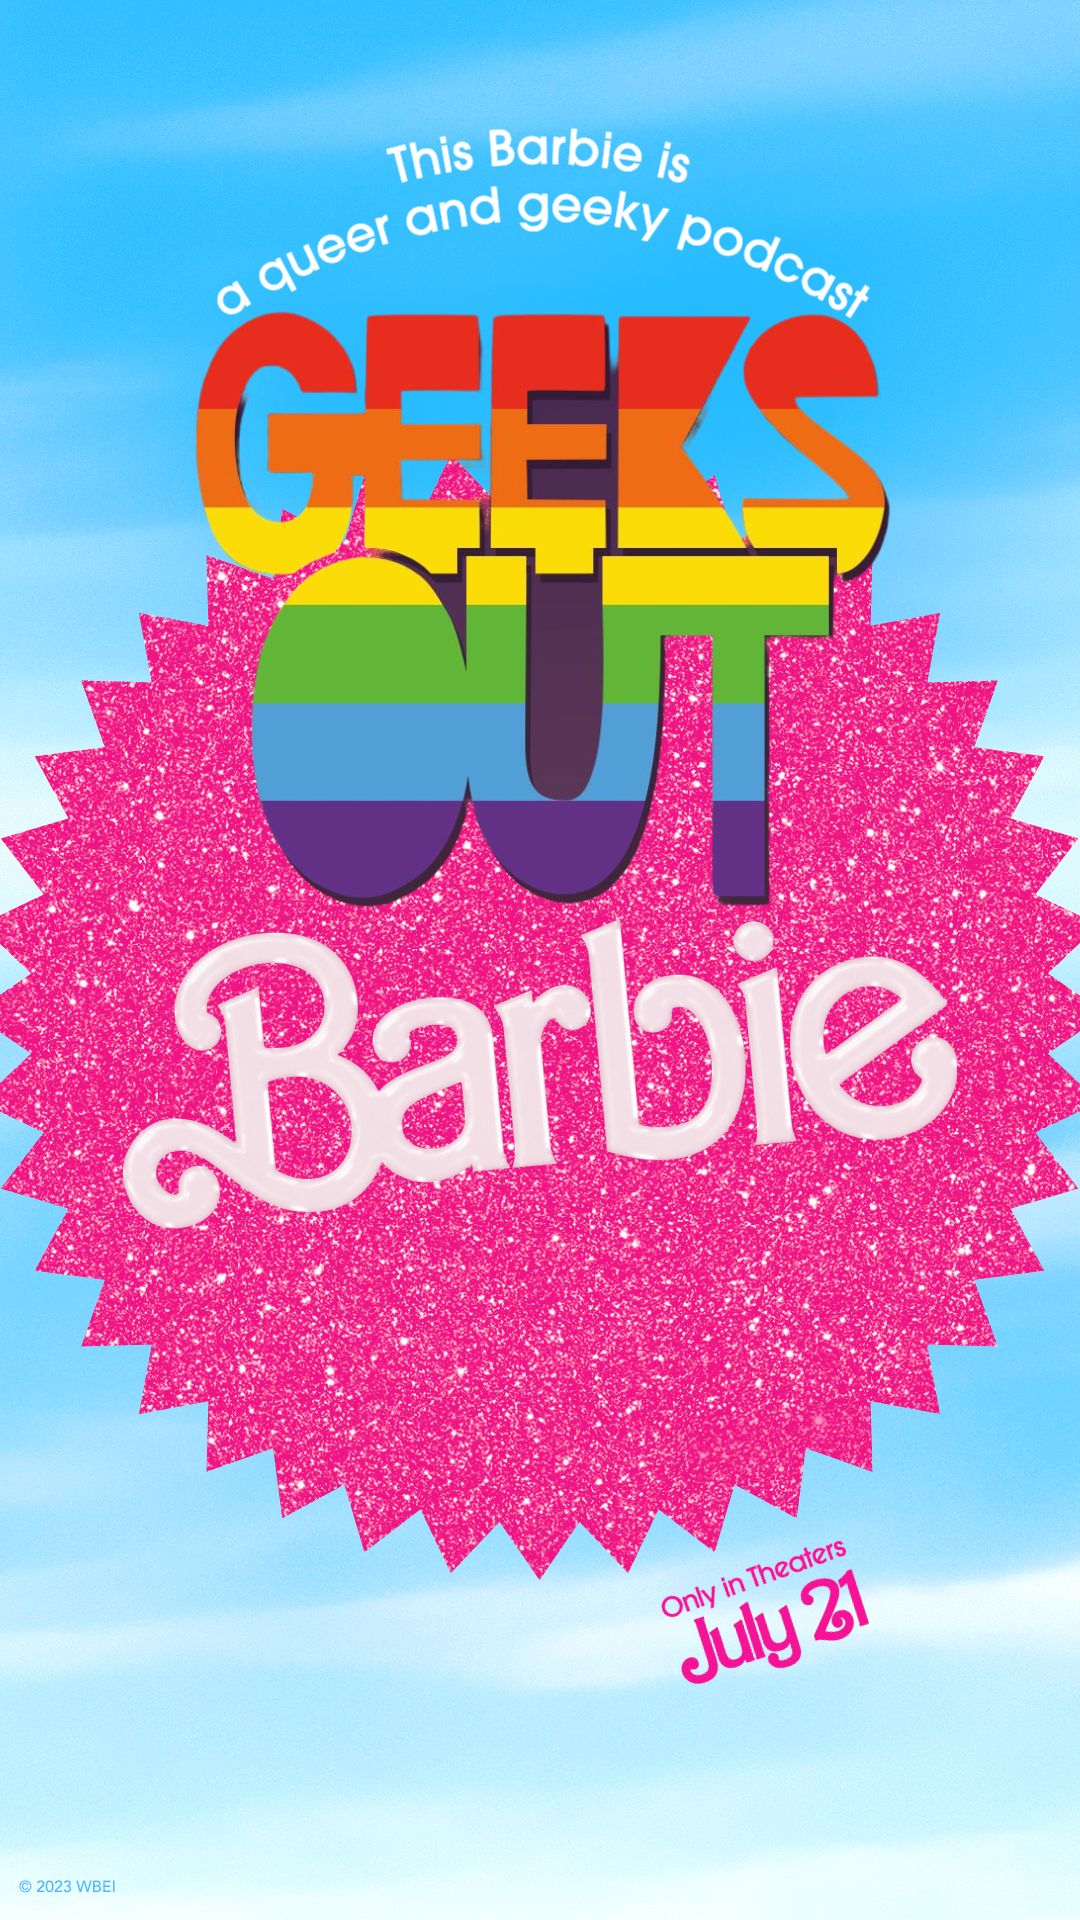 The image is a combination of the Geeks OUT and Barbie logos. Text says "This Barbie is a queer & geeky podcast"